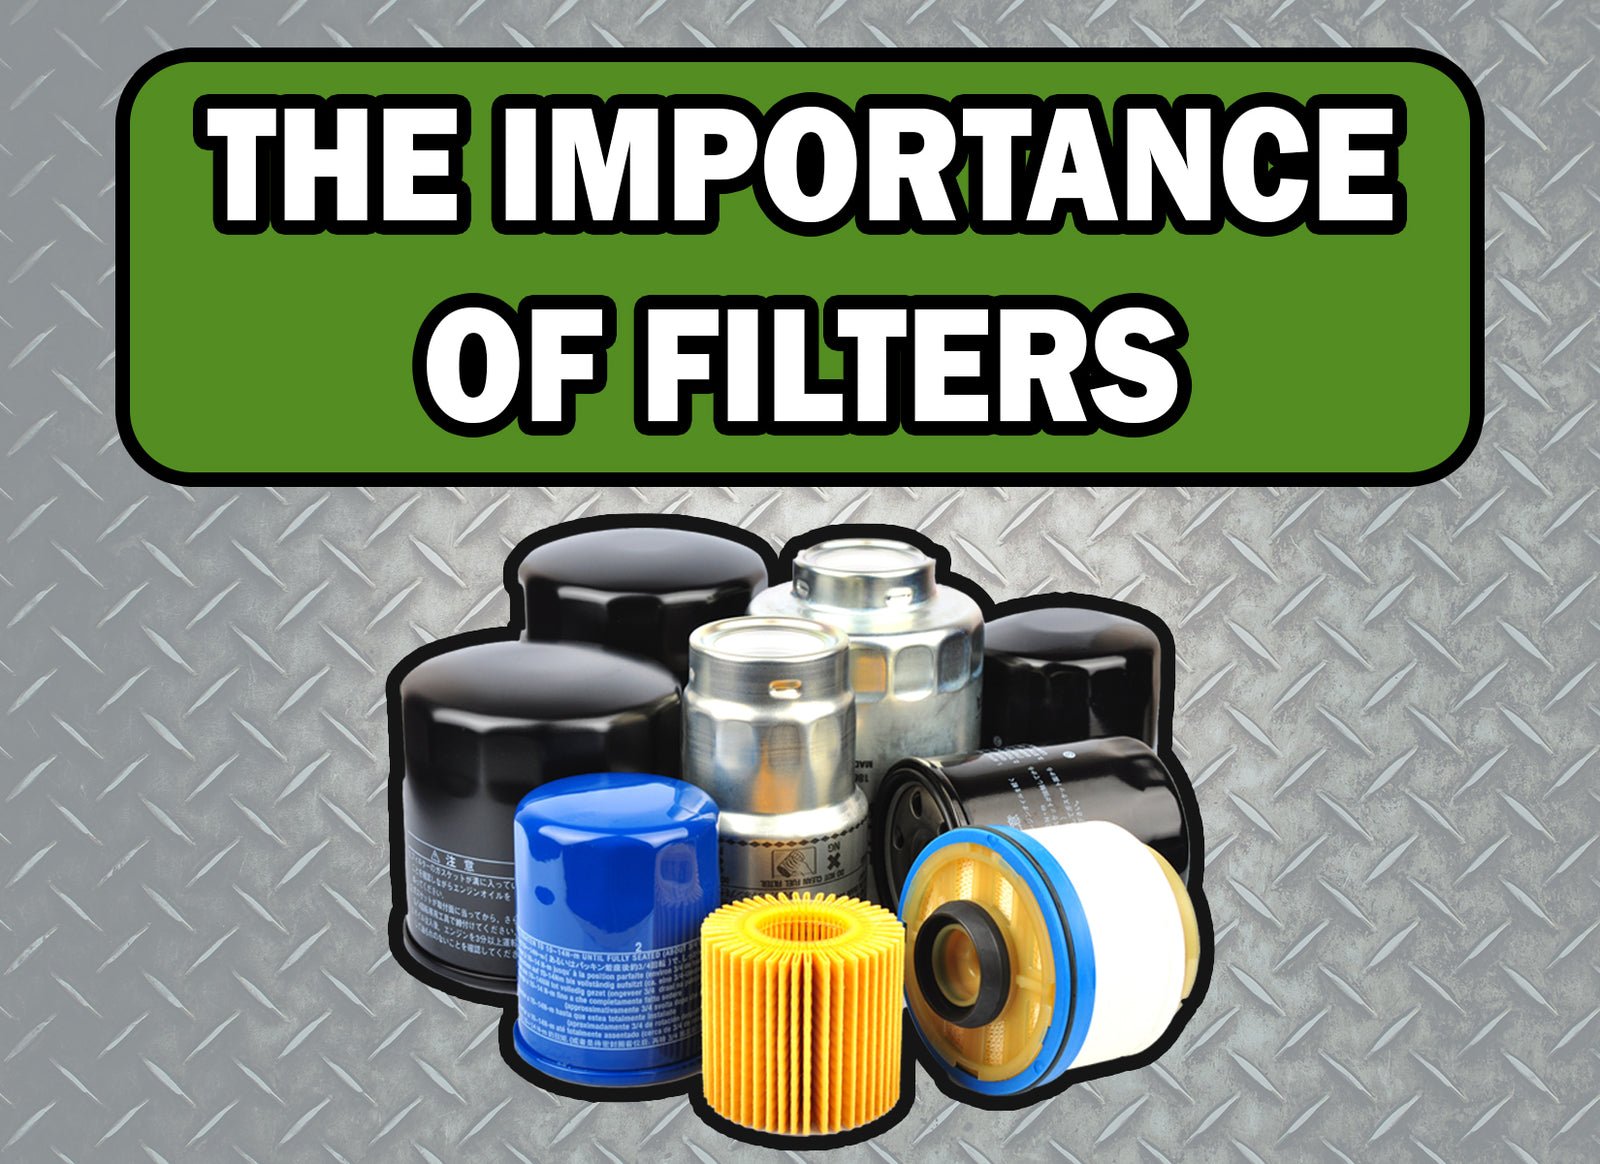 The Importance of Filters